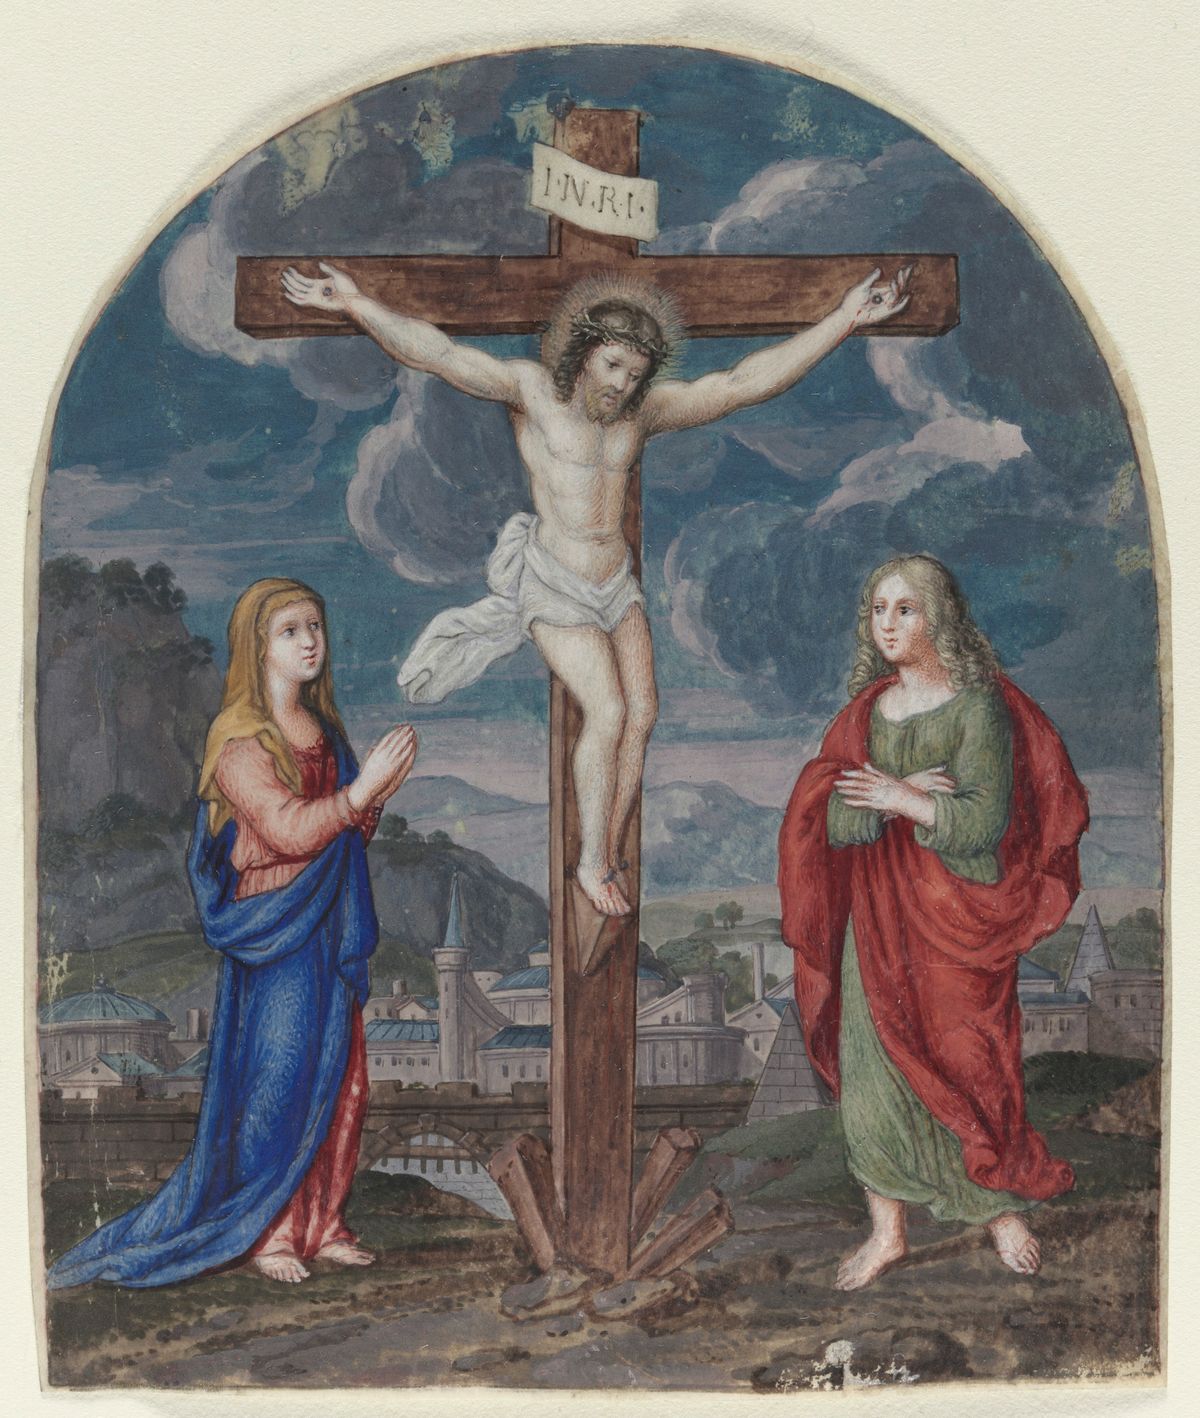 The Crucifixion: Miniature Excised from a Prayer Book (1540–1550, Flanders, Antwerp) - Public Domain Catholic Painting